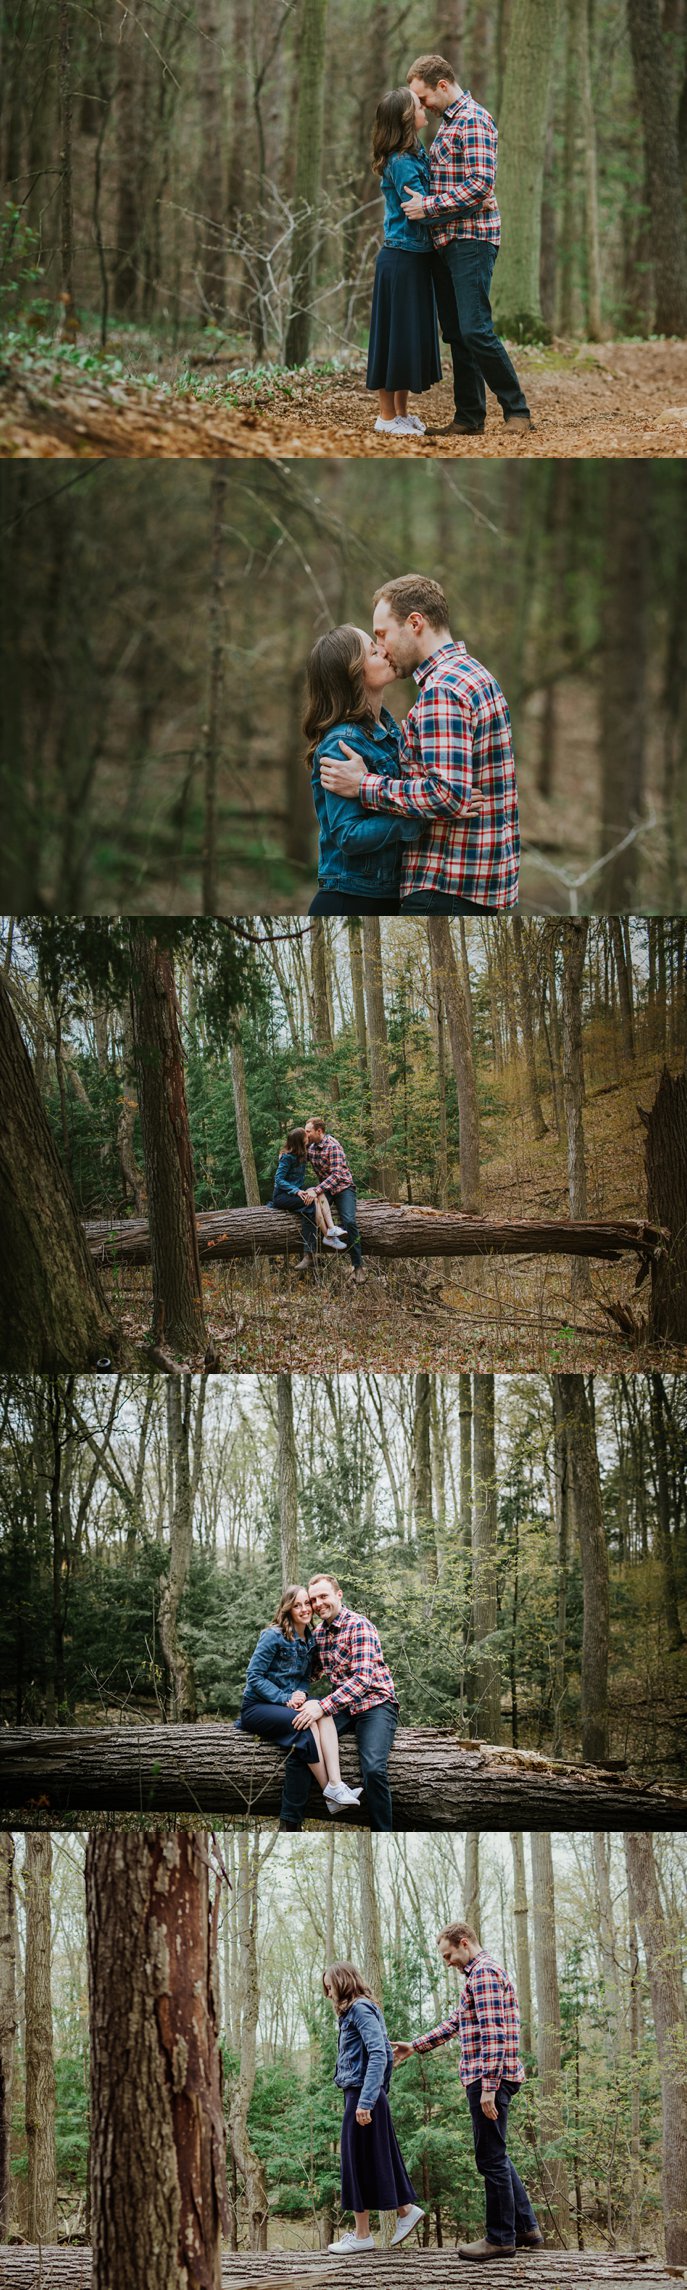 Kortright-centre-engagement-photography-LM-17.jpg